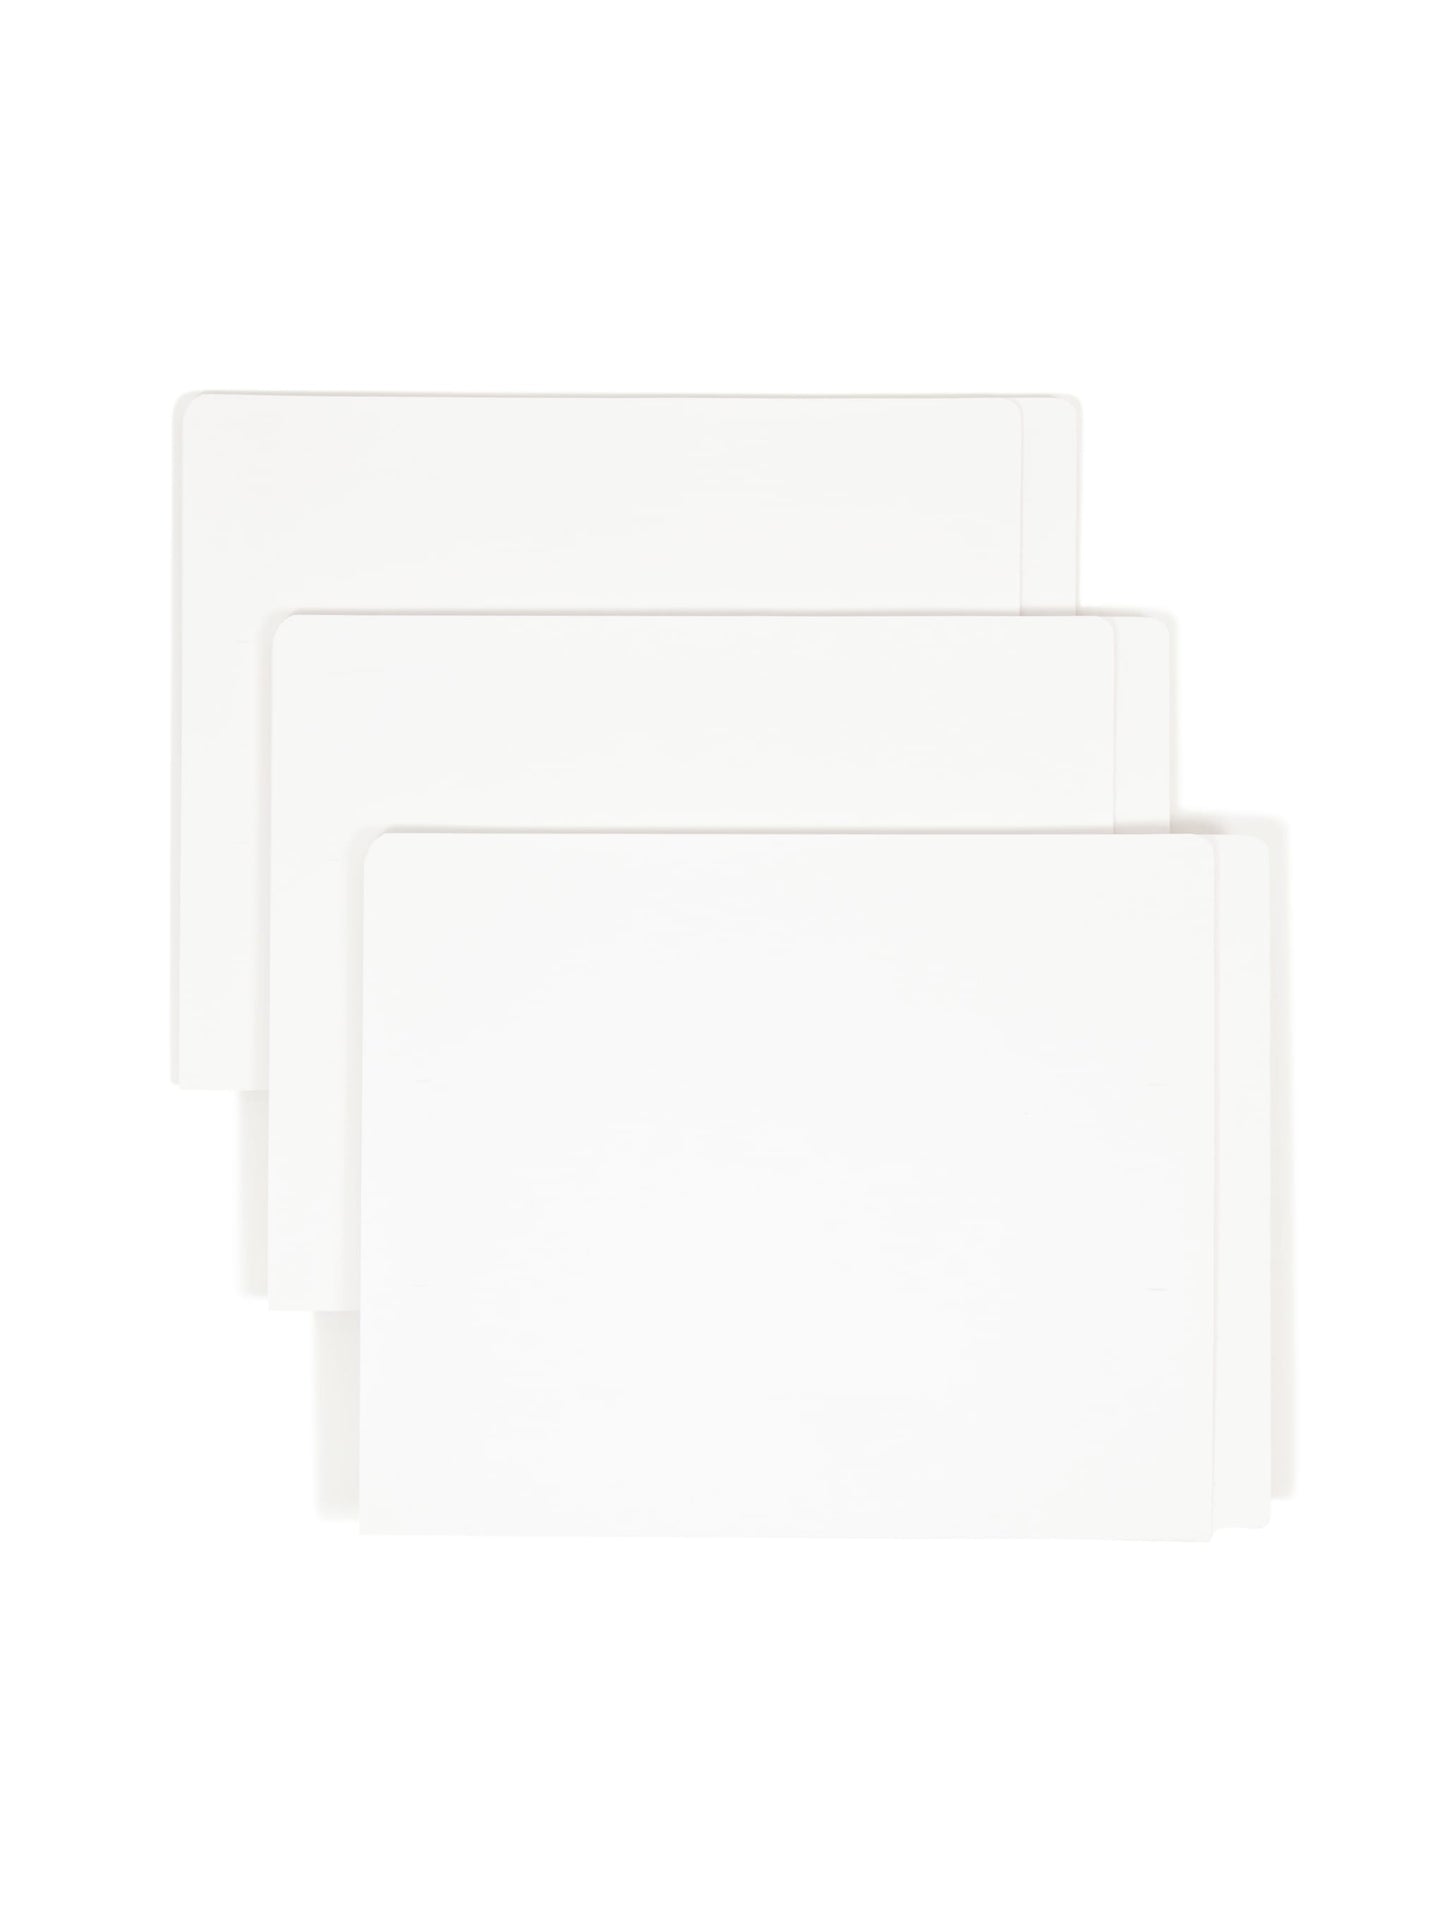 Reinforced End Tab File Folders, Straight-Cut Tab, Ivory Color, Letter Size, Set of 100, 086486245098